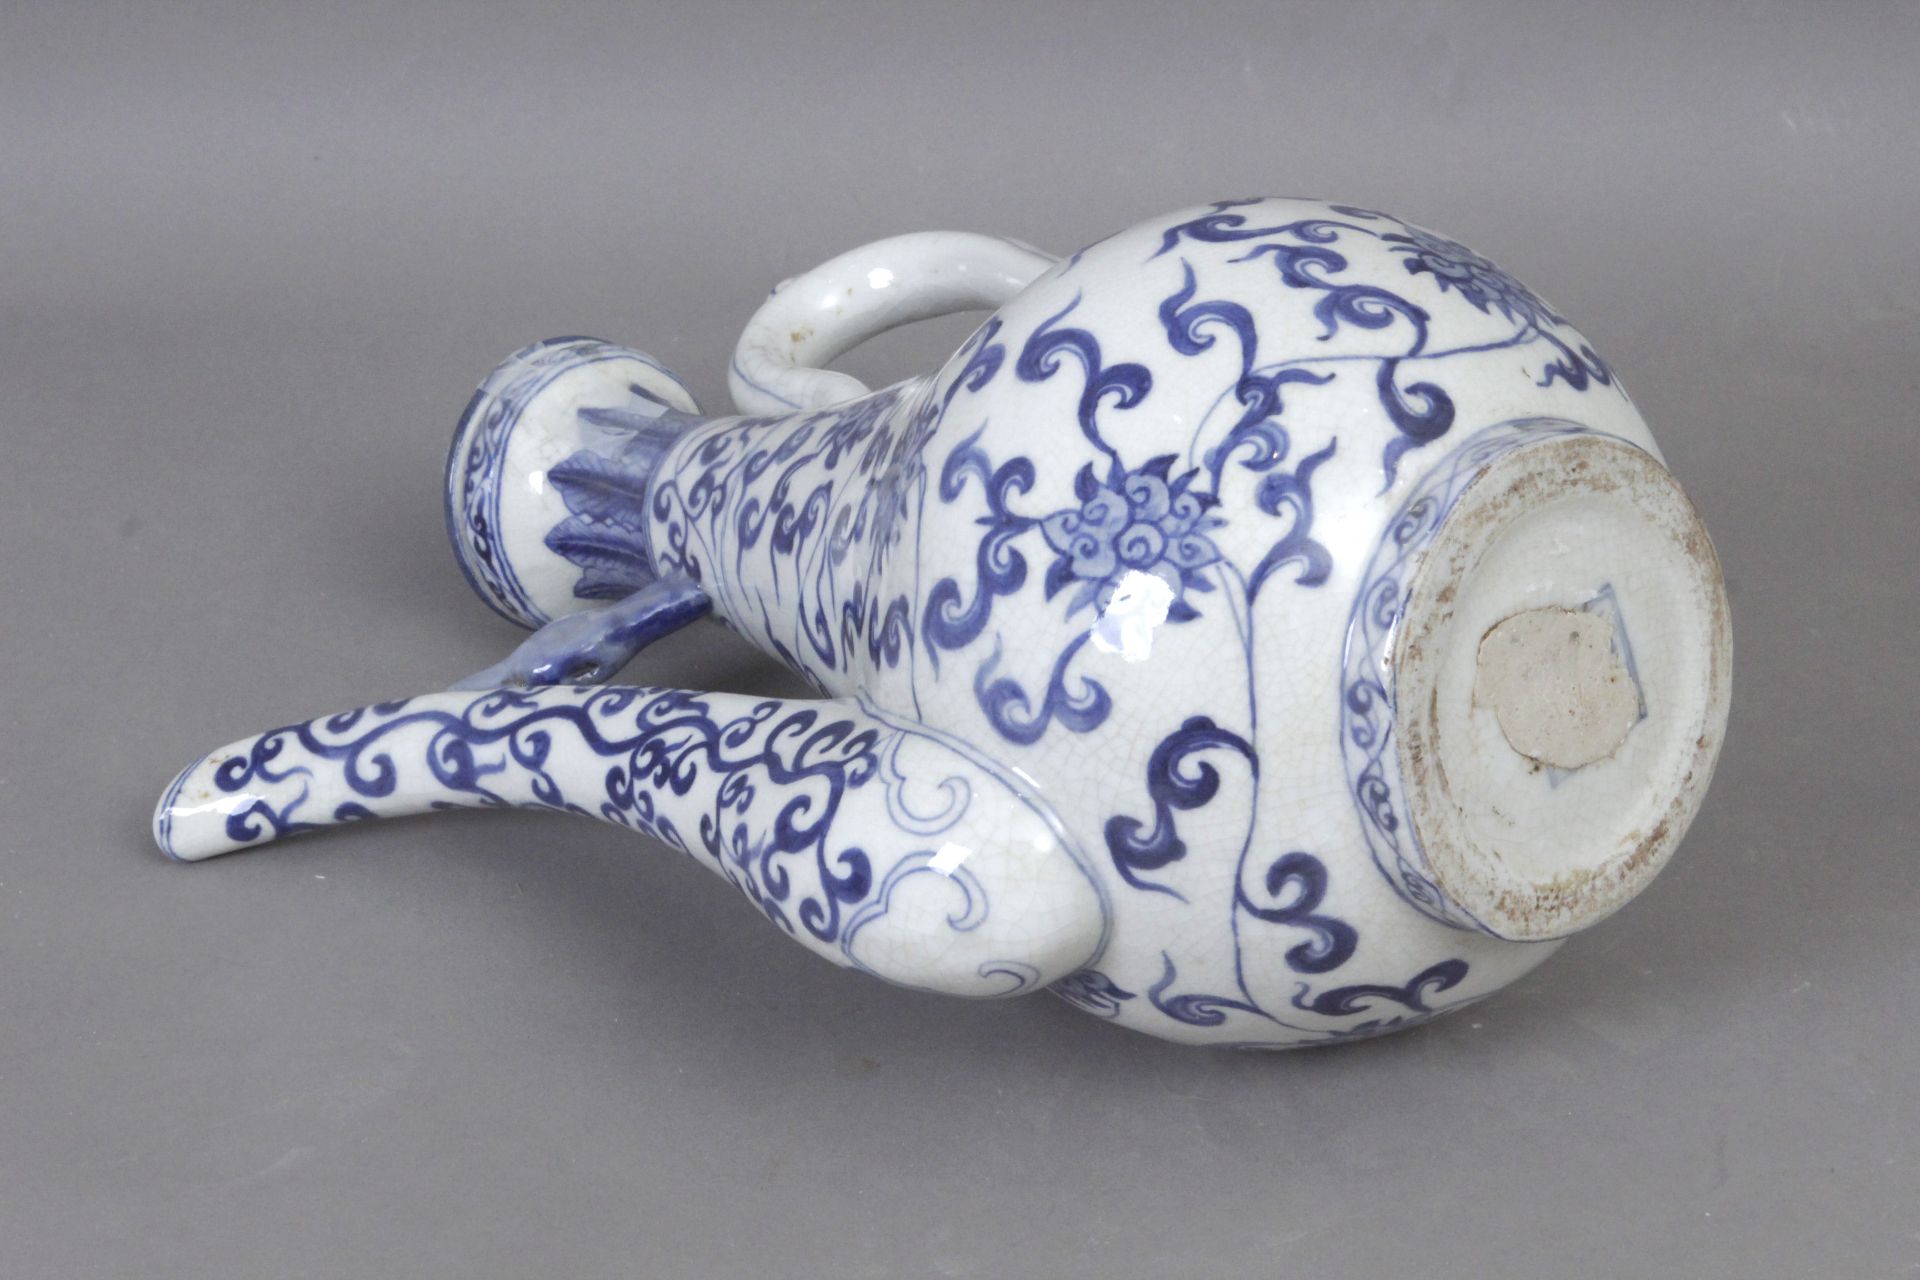 A 20th century Chinese vase in blue and white porcelain - Image 3 of 3